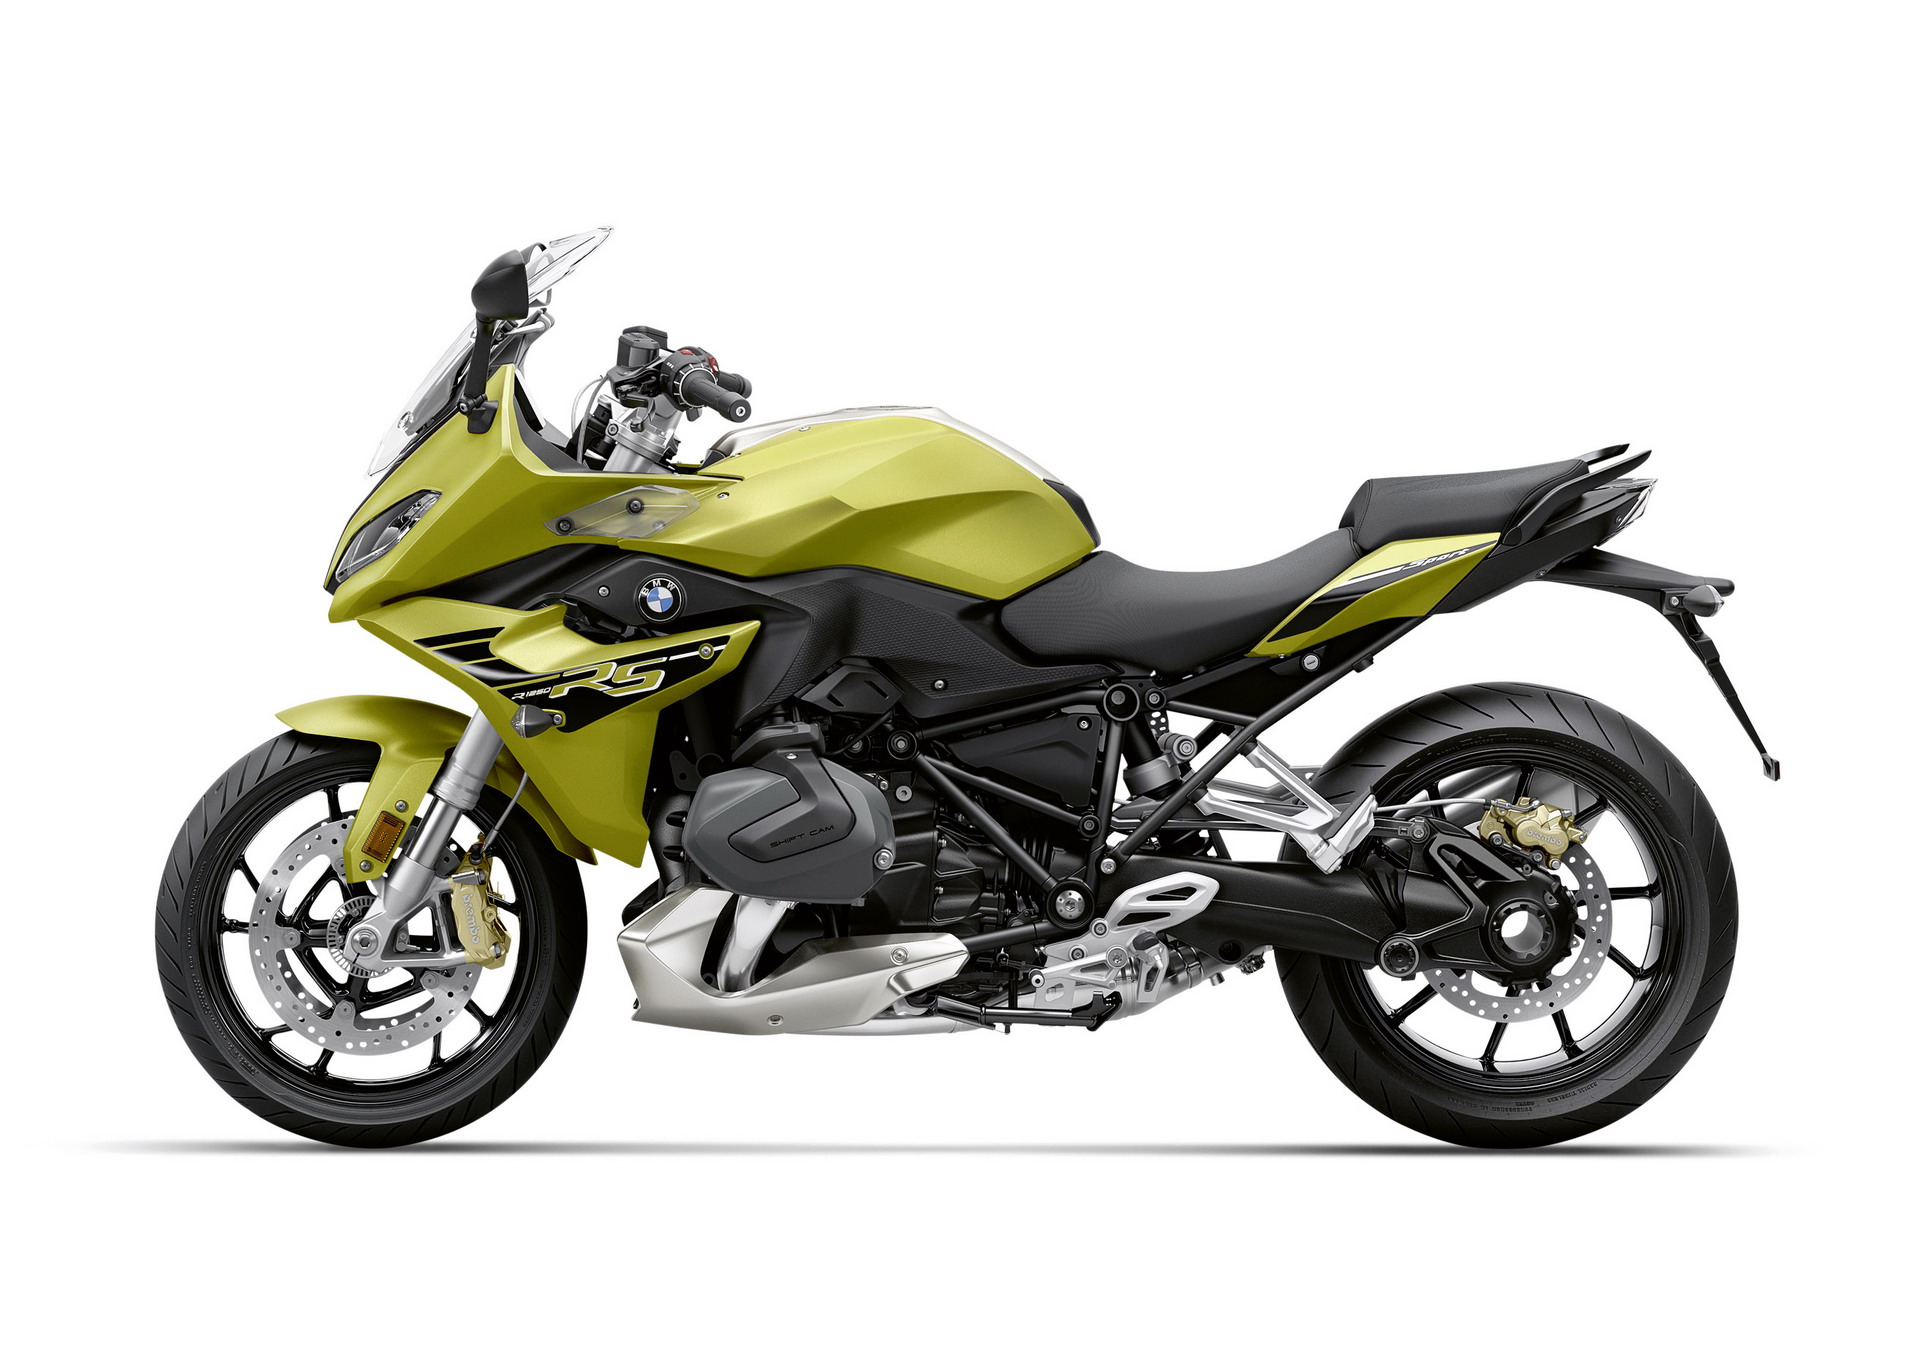 Bmw Motorrad Launches Extensive Updates For My21 Motorcycles